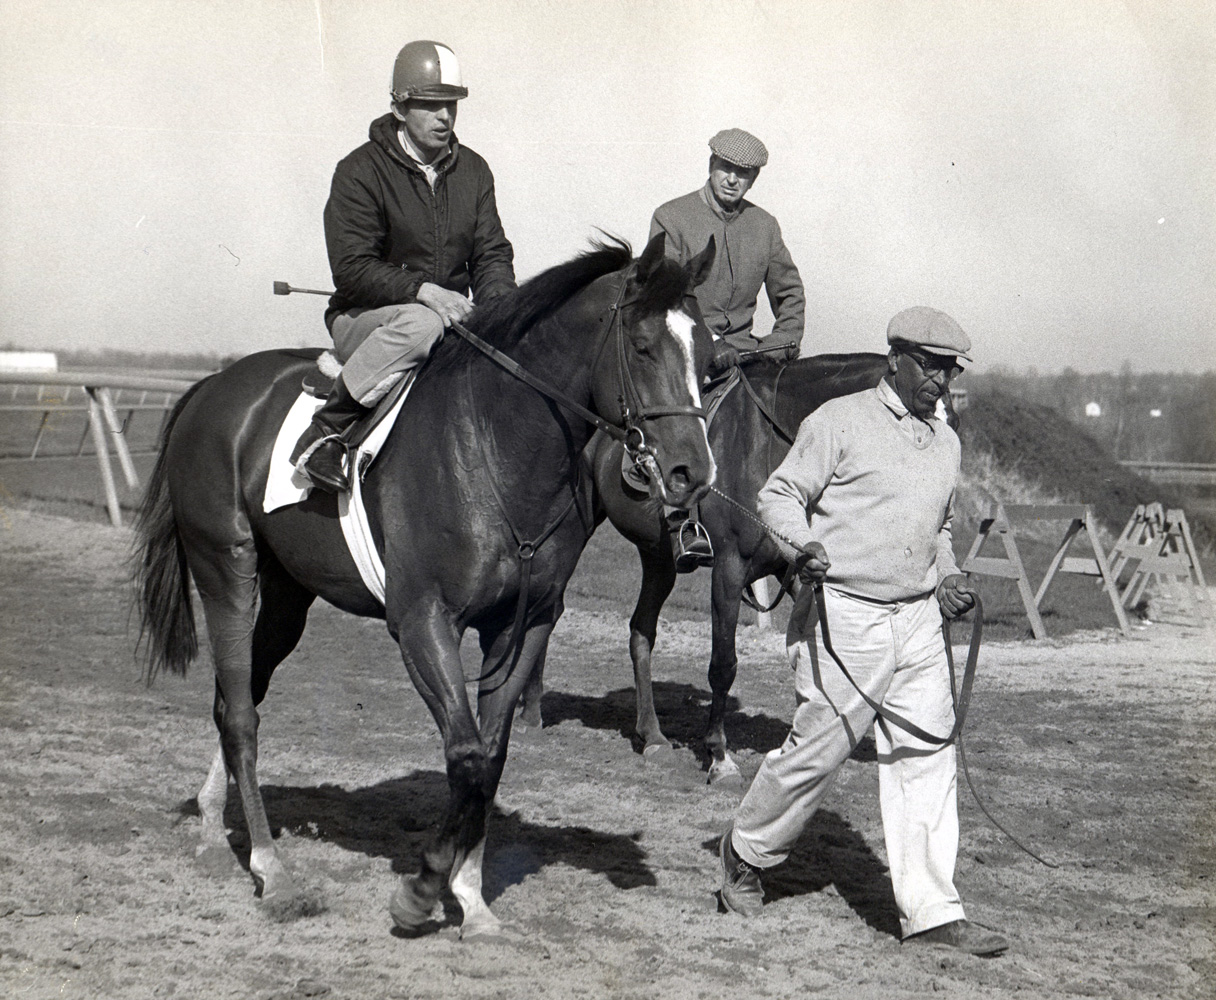 Horatio Luro (on horseback in background) joining Northern Dancer during training hours, April 1964 (Museum Collection)